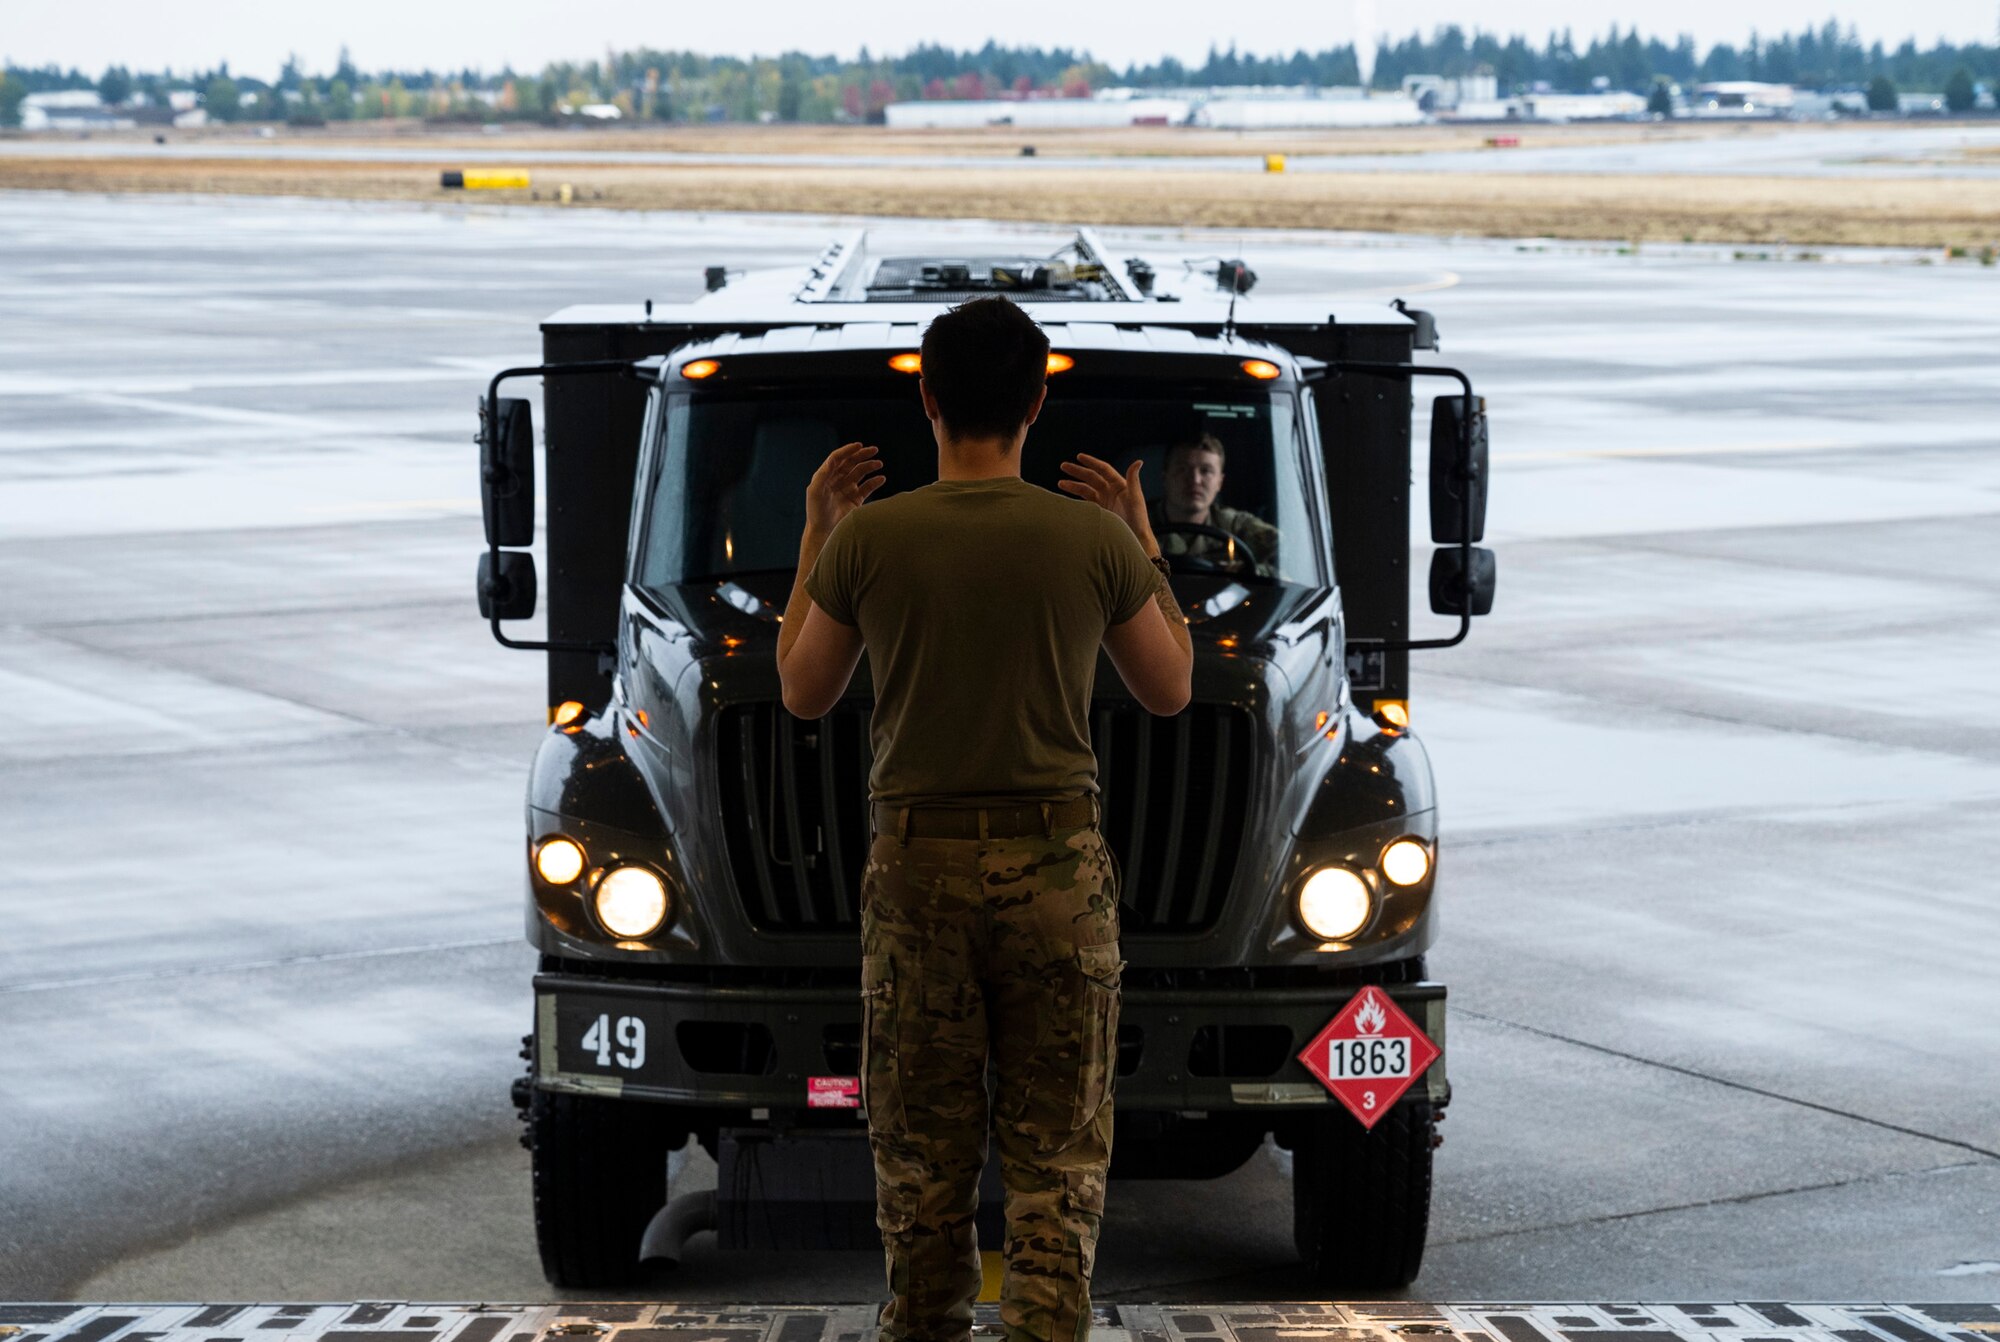 U.S. Air Force Senior Airman Kainoa Cook, a loadmaster with the 4th Airlift Squadron, marshals an R-11 fuel truck onto a C-17 Globemaster III during Exercise Rainier War 23A at Joint Base Lewis-McChord, Washington, Sept. 25, 2023. Rainier War is an annual exercise led by the 62d Airlift Wing designed to evaluate the ability to generate, employ and sustain in-garrison and forward deployed forces. These exercises are necessary in assessing and maintaining wartime operational tempos, ensuring command and control across multiple locations. During the exercise, Airmen will respond to scenarios that replicate today’s contingency operations and will address full-spectrum readiness against modern threats brought on by peer adversaries. (U.S. Air Force photo by Staff Sgt. Rachel Williams)